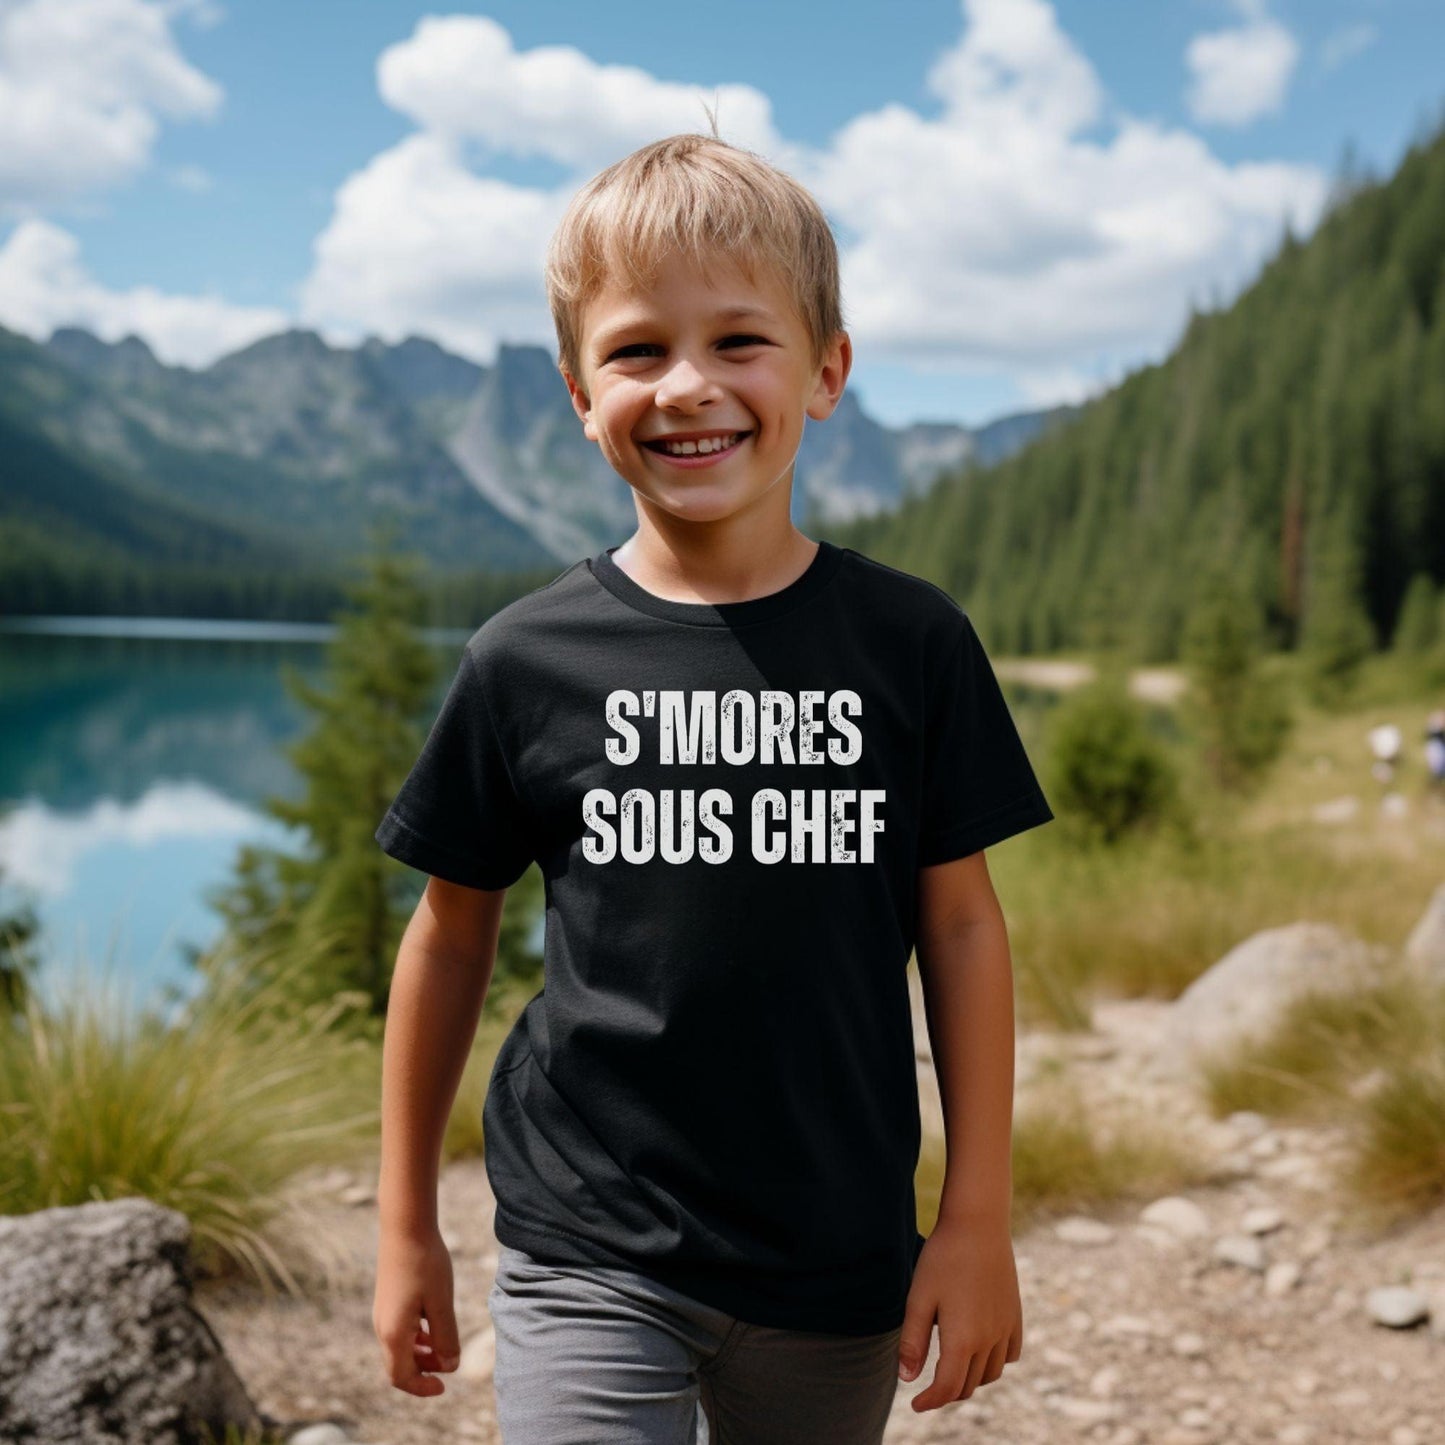 S'mores Sous Chef Kids T-Shirt - Adventure Threads Company